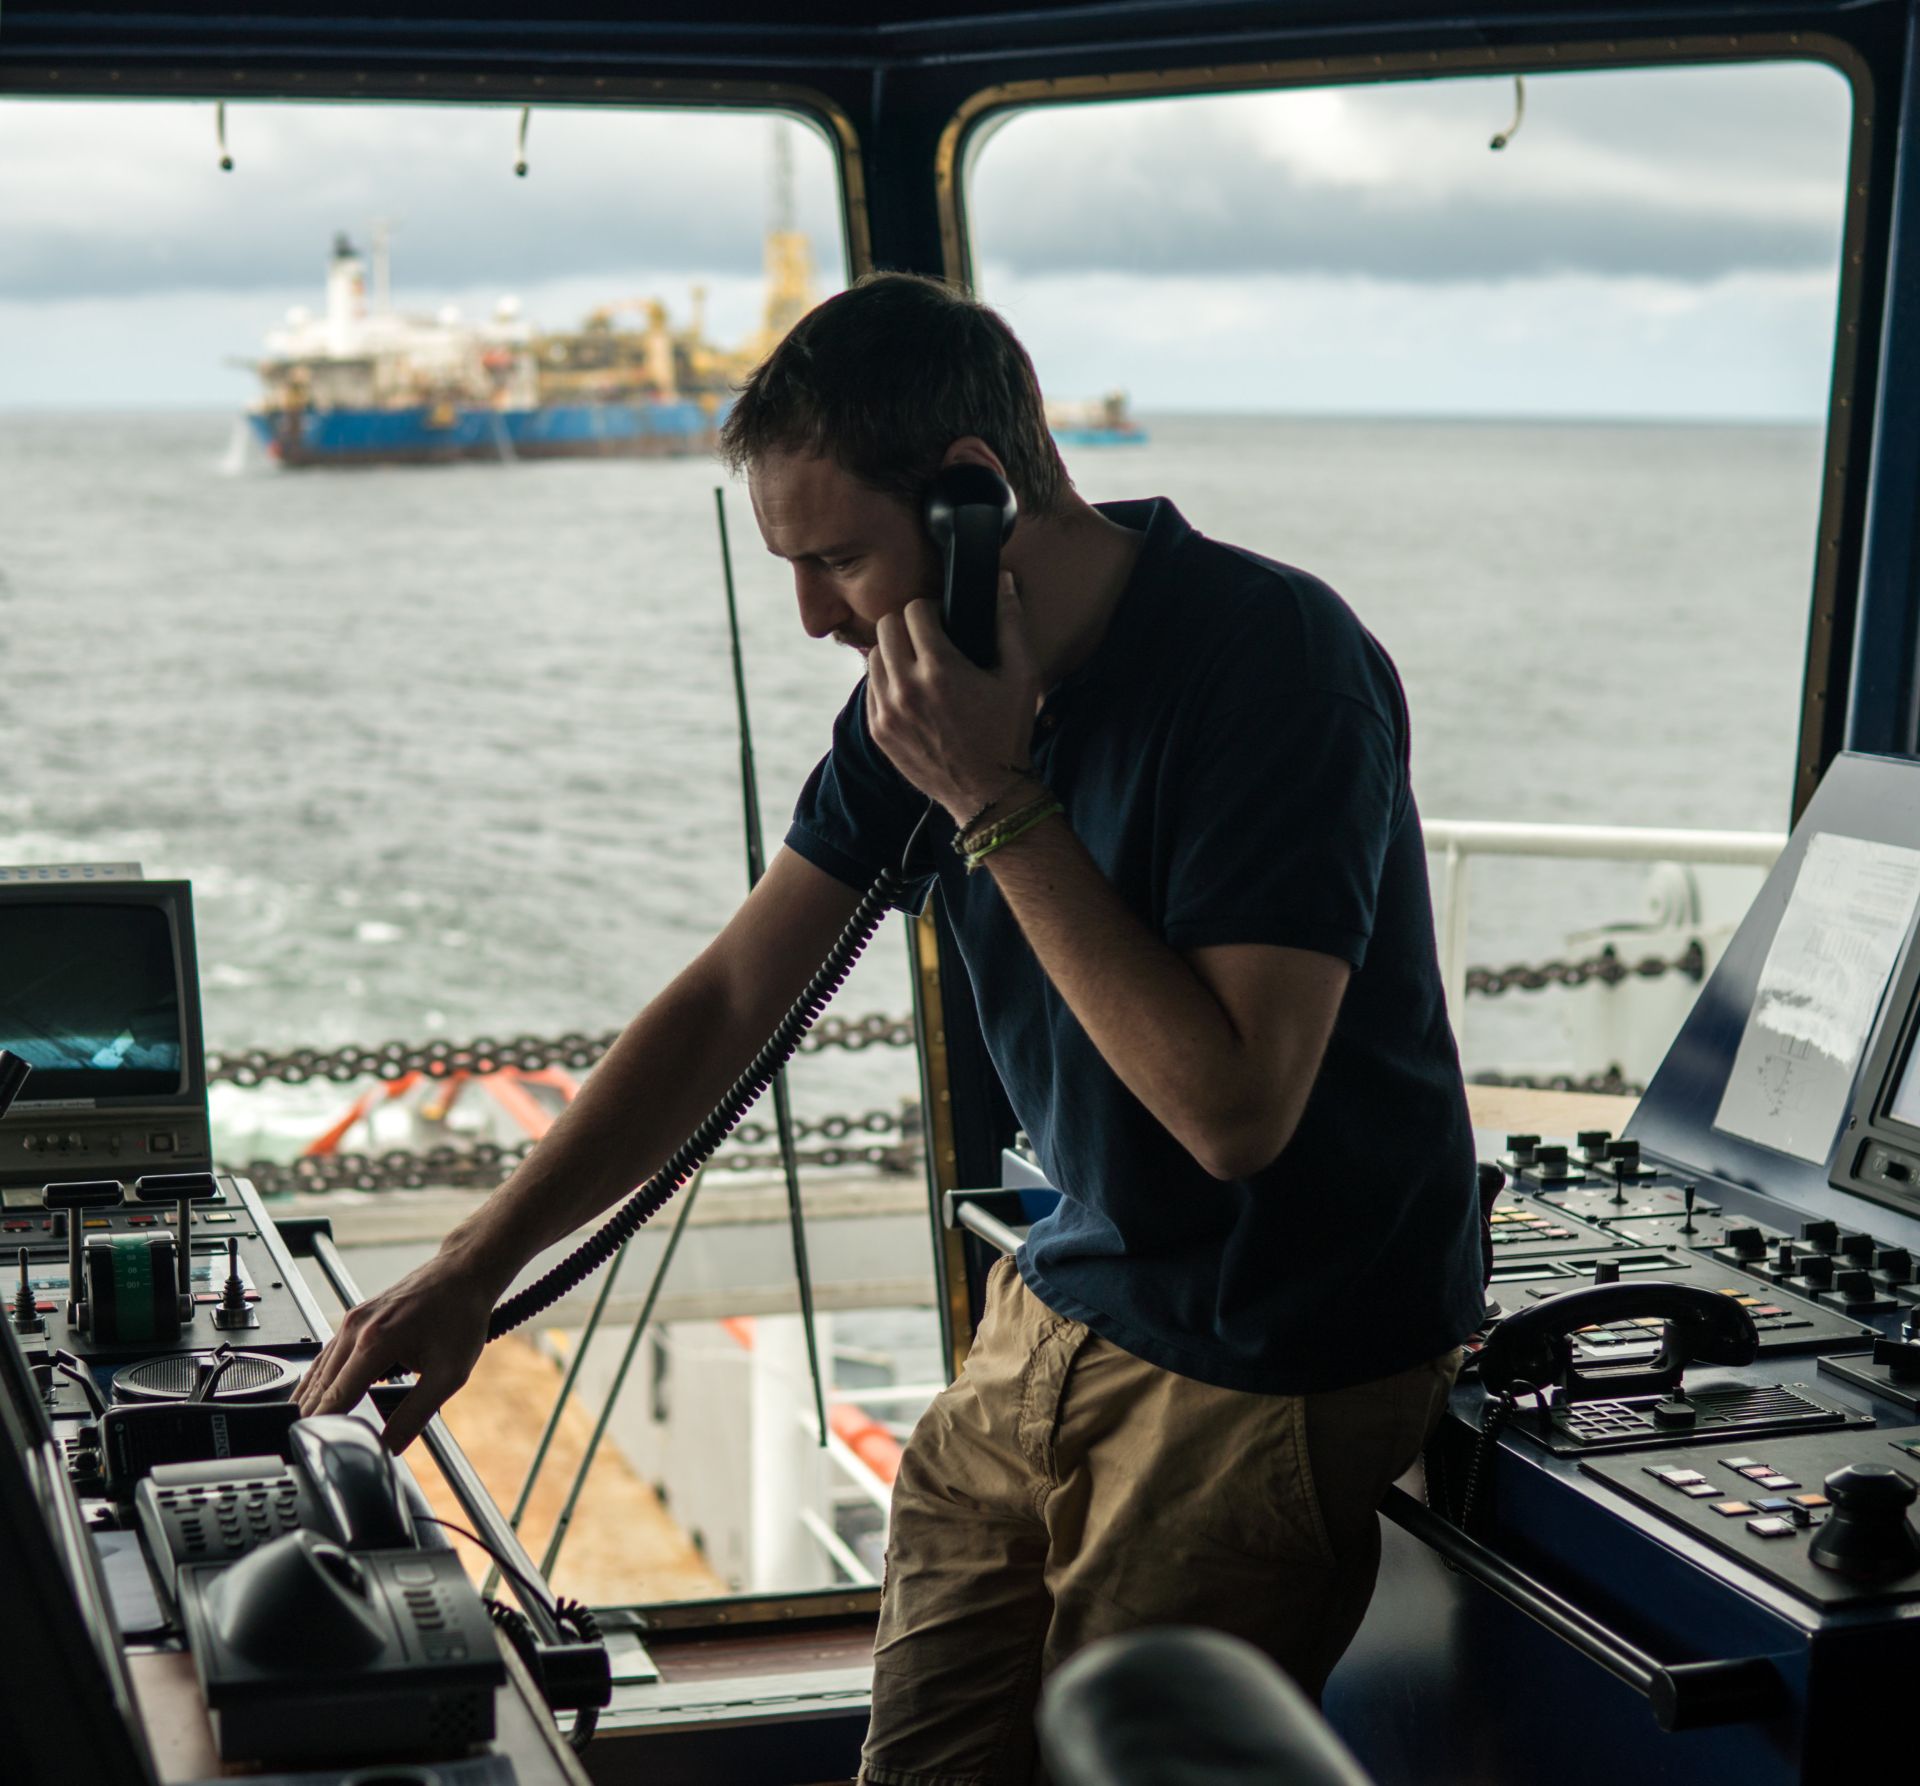 Maritime officer communicating via VHF radio in the bridge of a vessel, overseeing maritime operations and ensuring safe navigation.